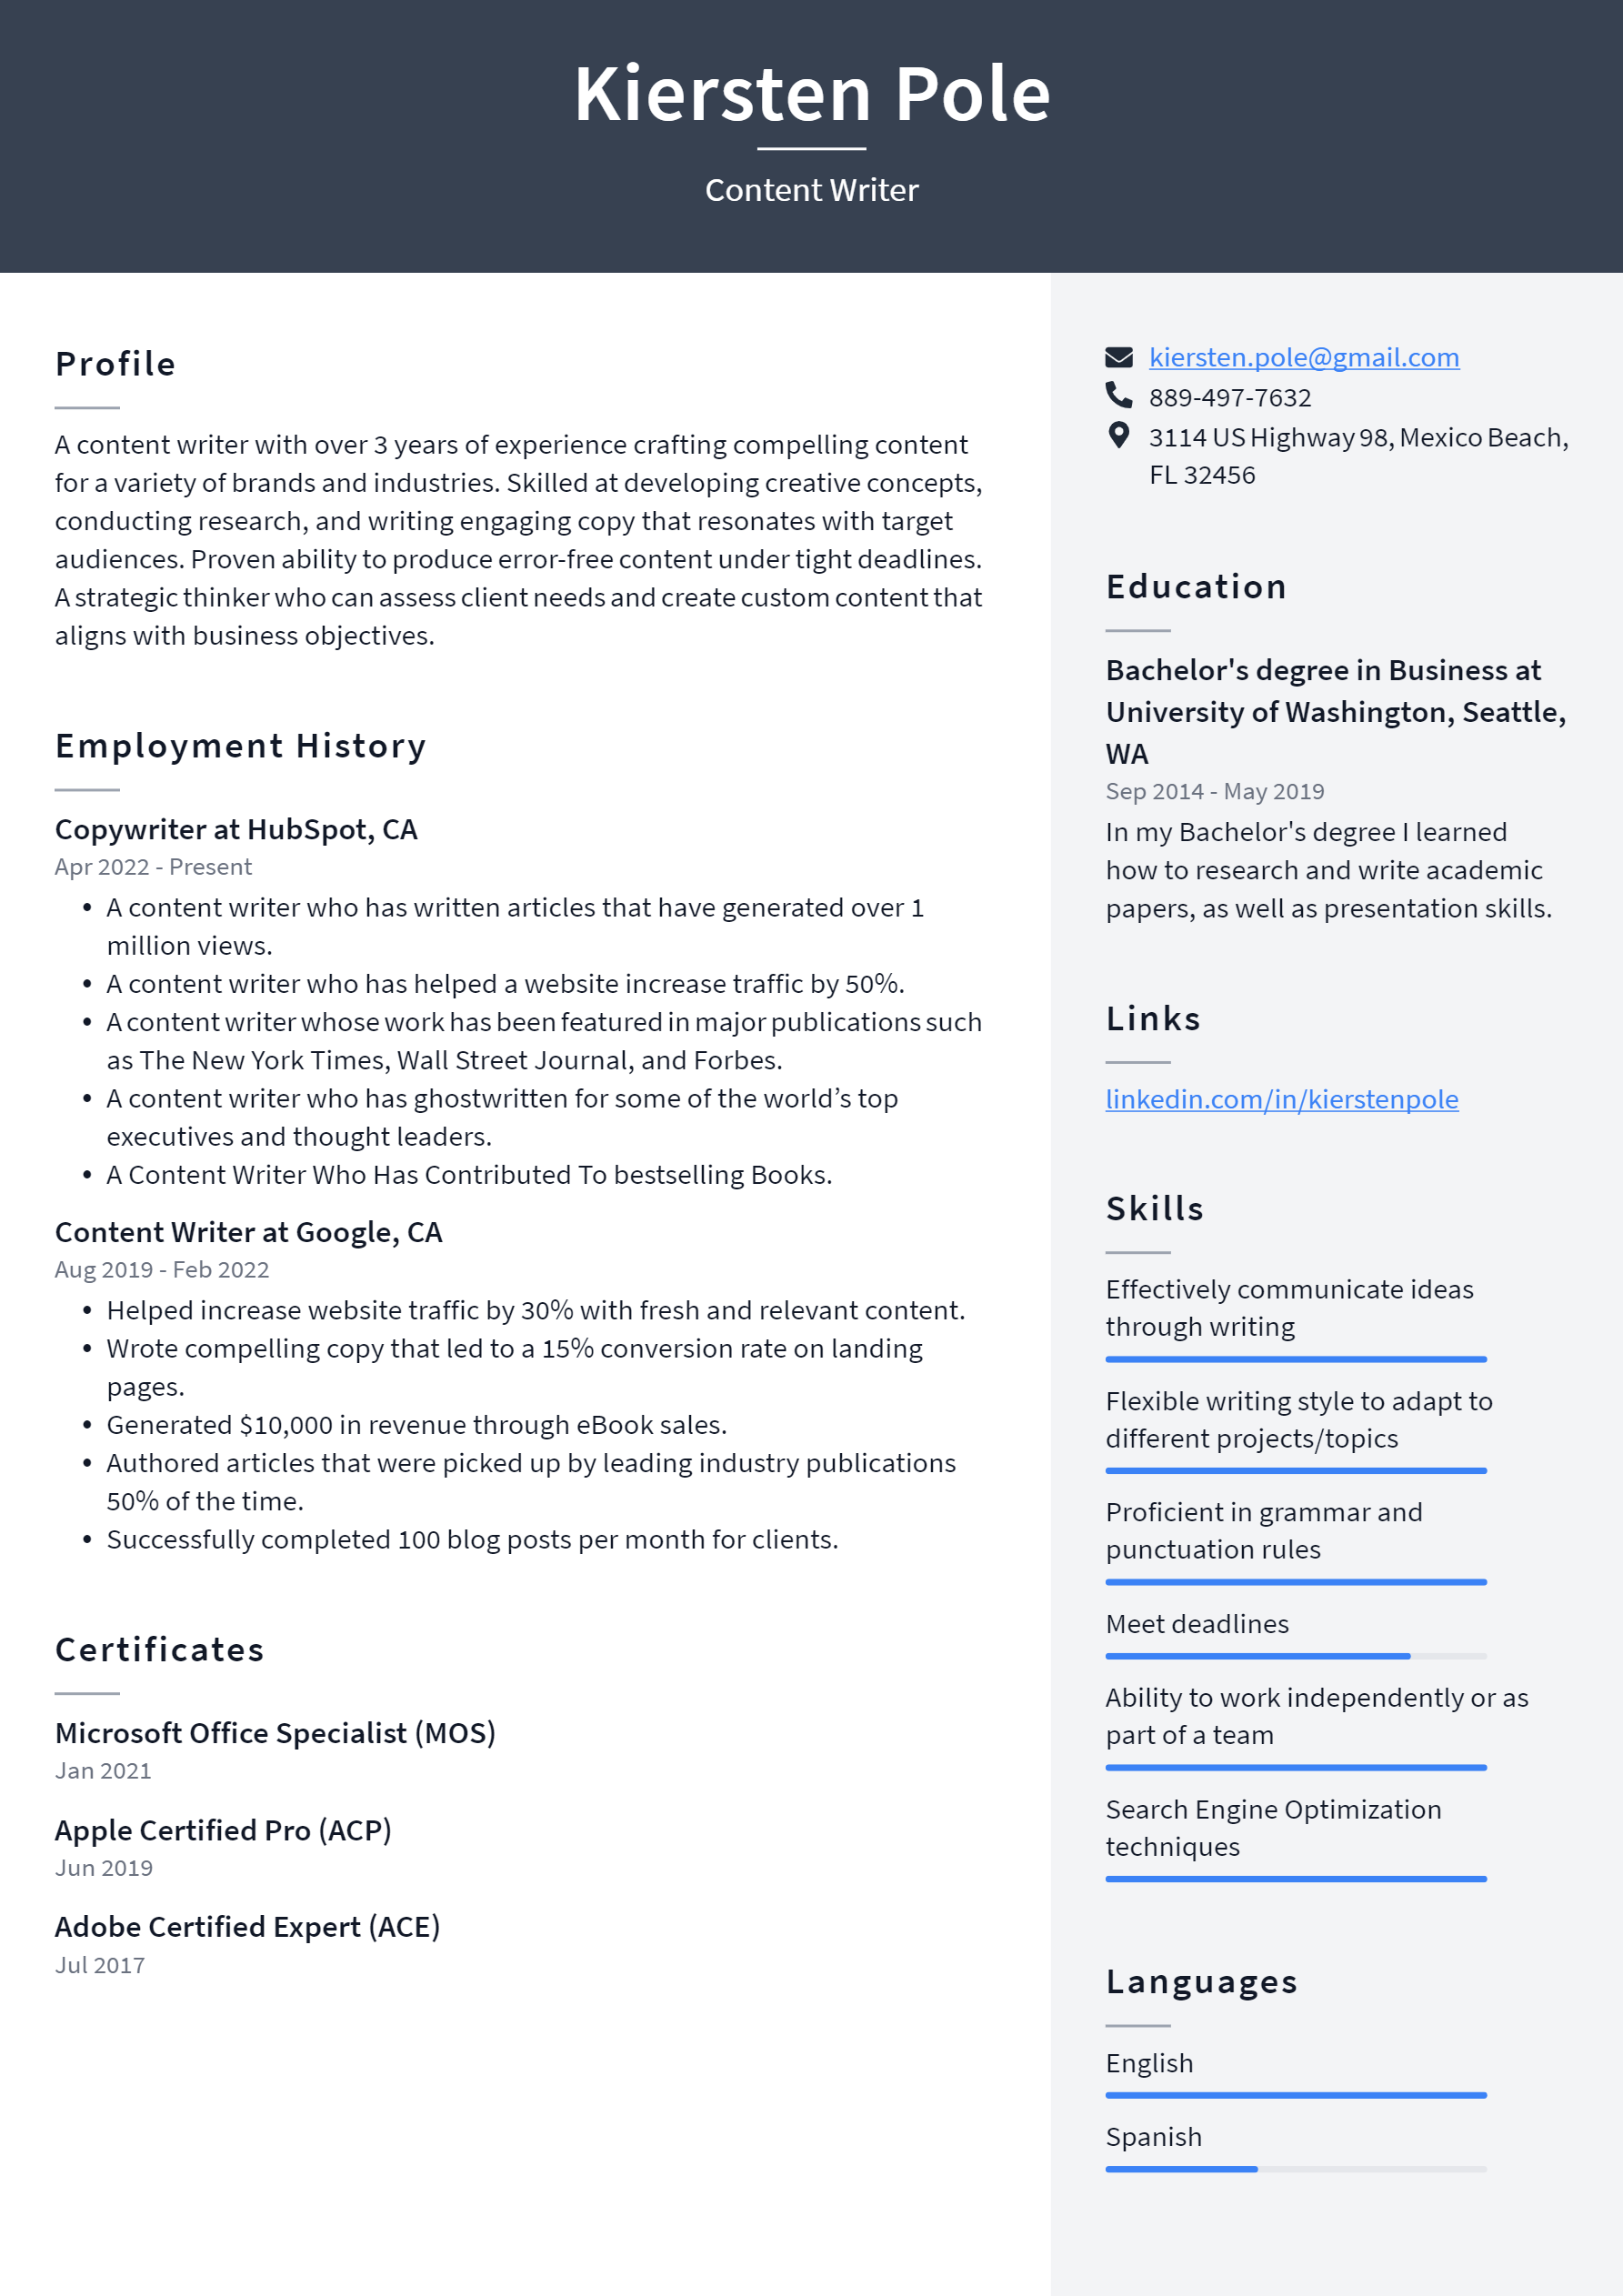 content writer resume download